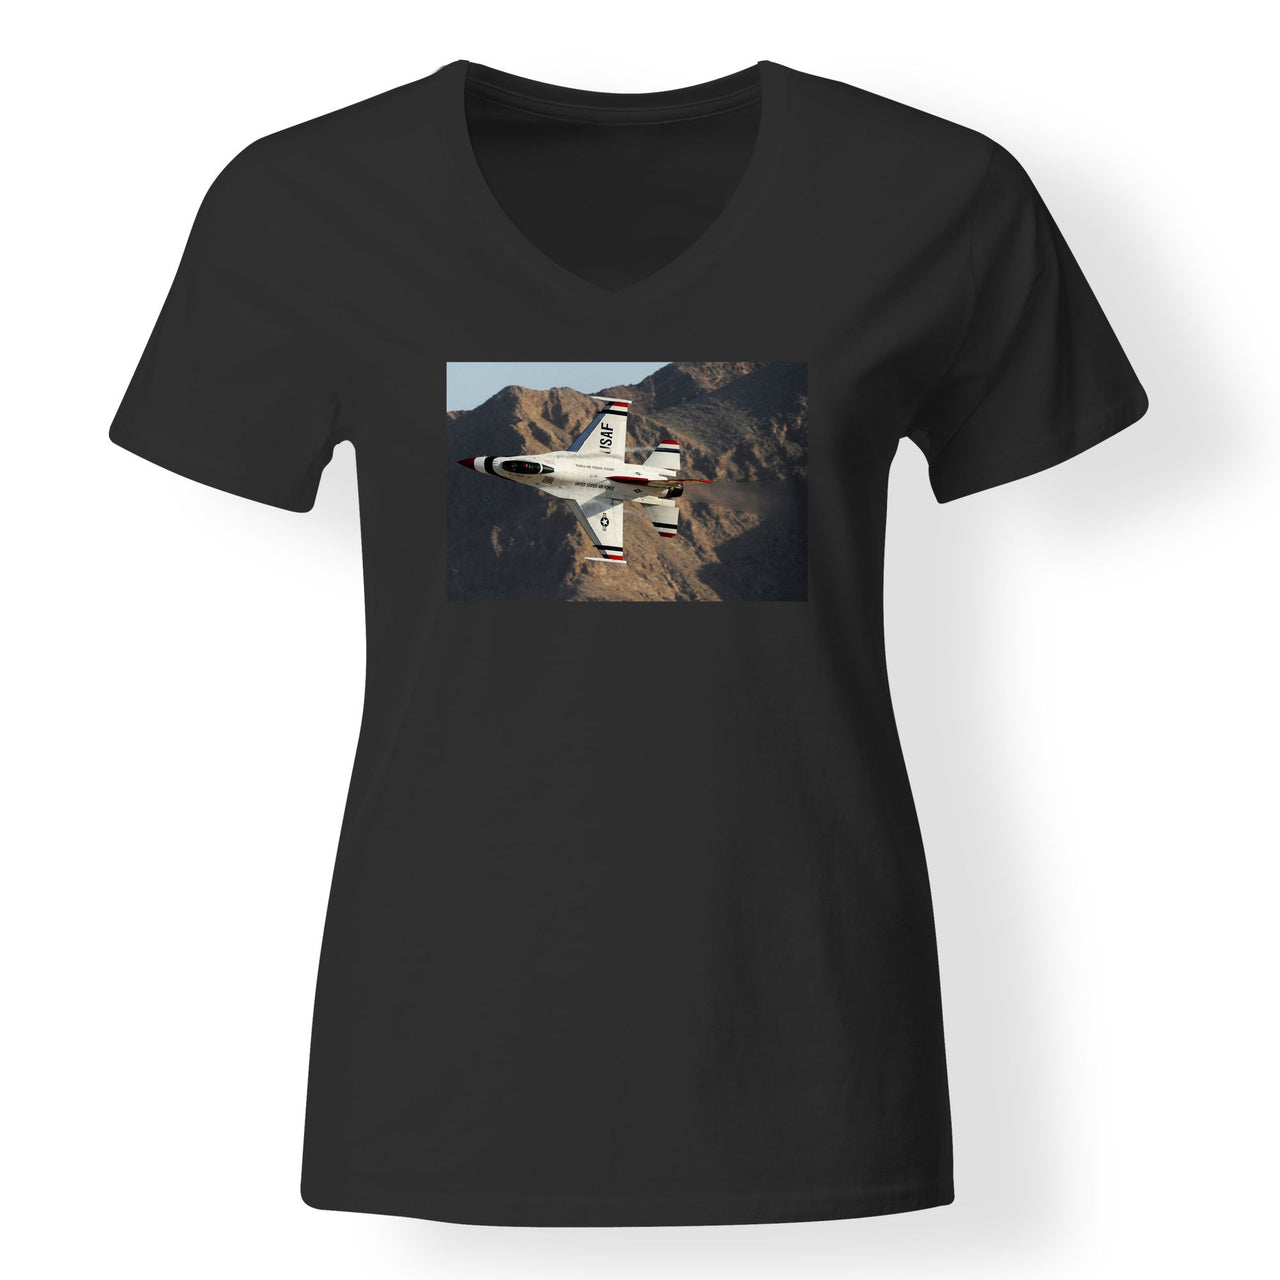 Amazing Show by Fighting Falcon F16 Designed V-Neck T-Shirts